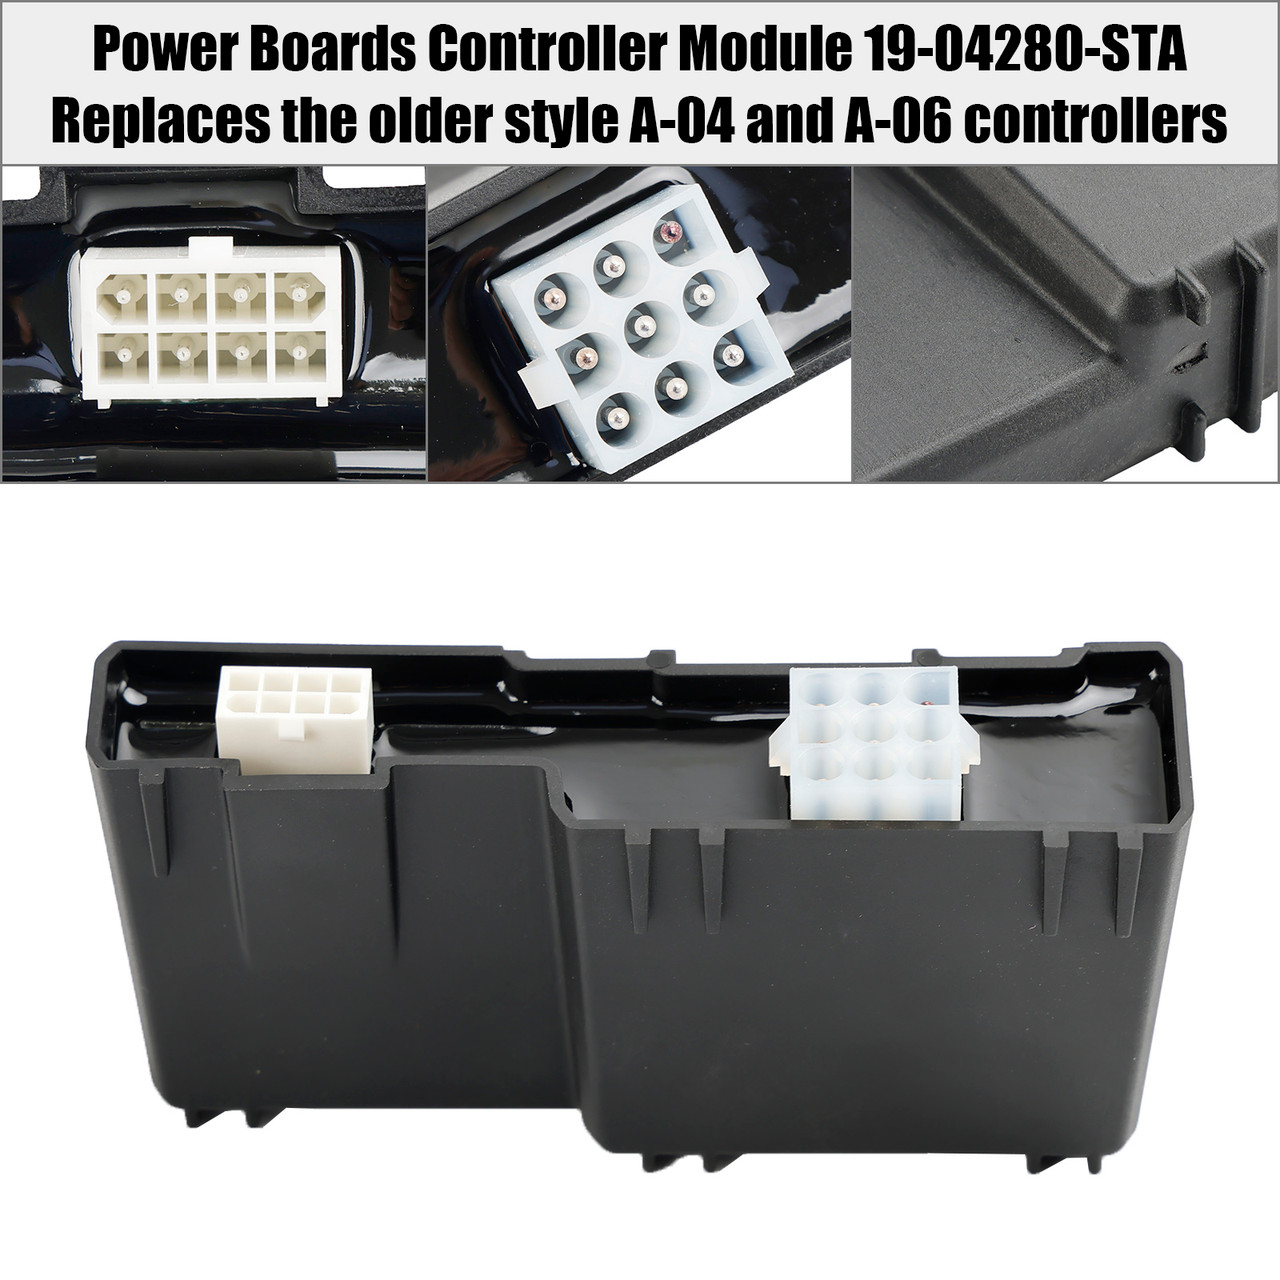 Power Boards Controller Module 19-04280-STA Replace For A-04 and A-06 controllers